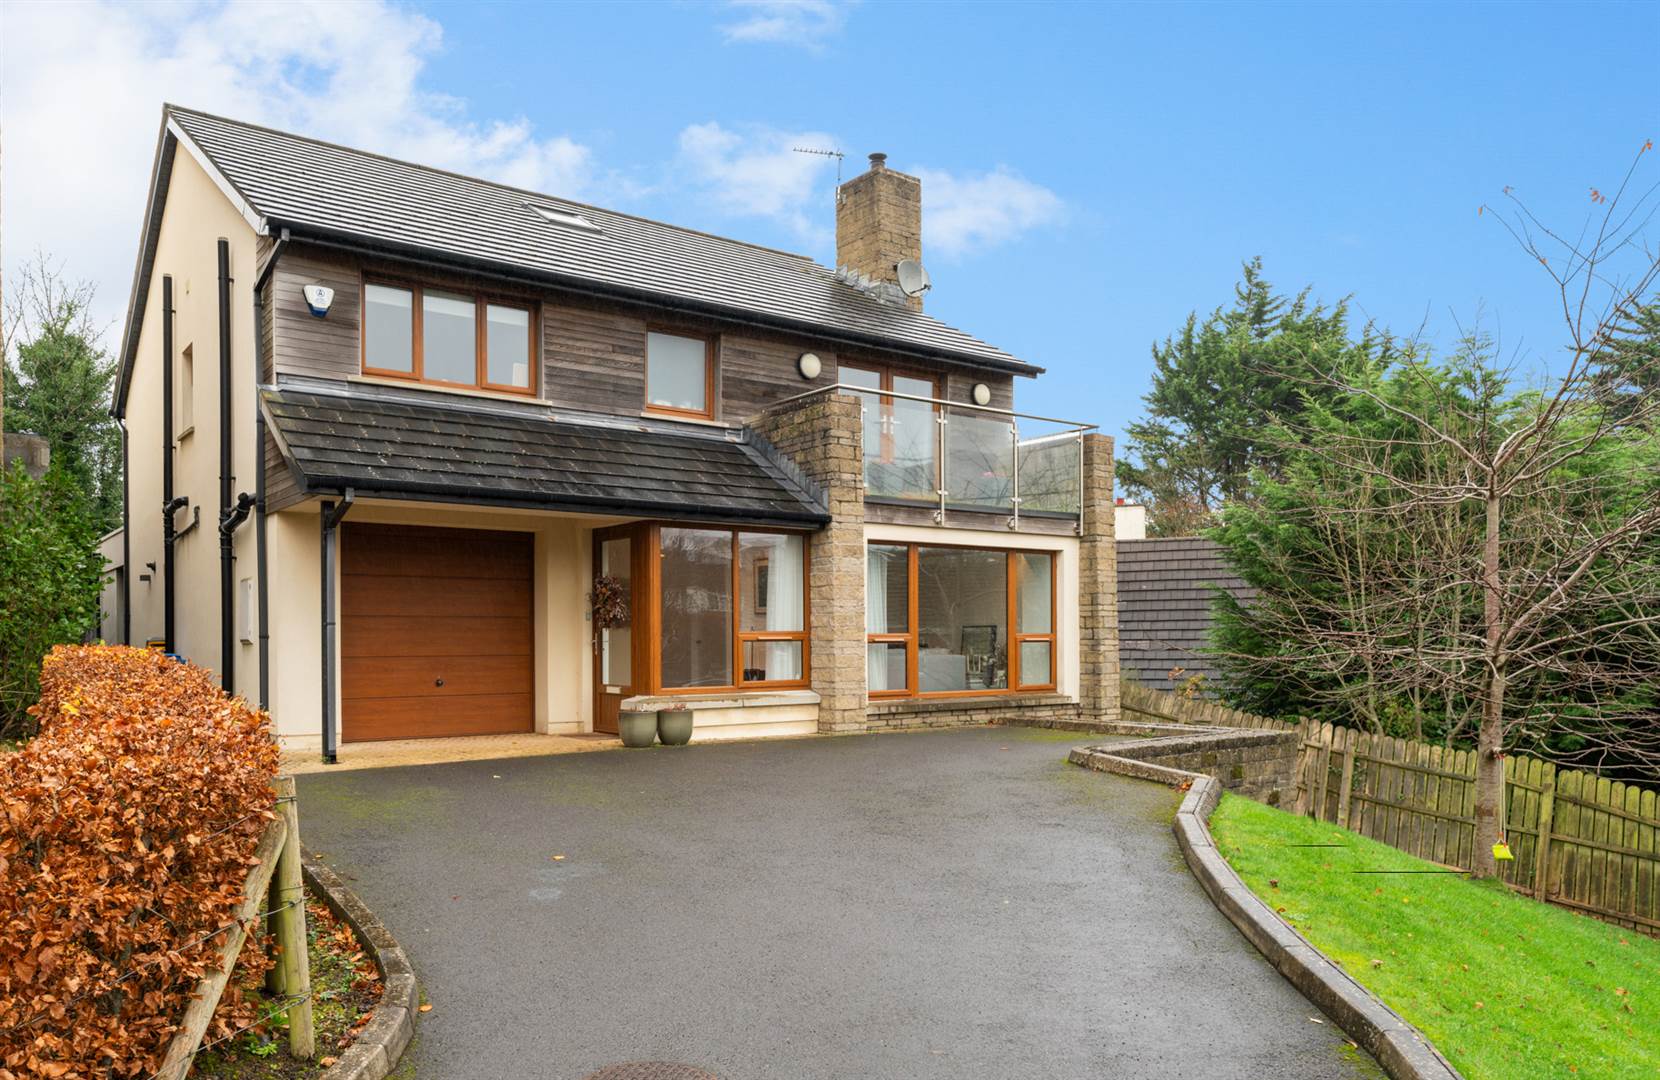 Detached Property in Holywood